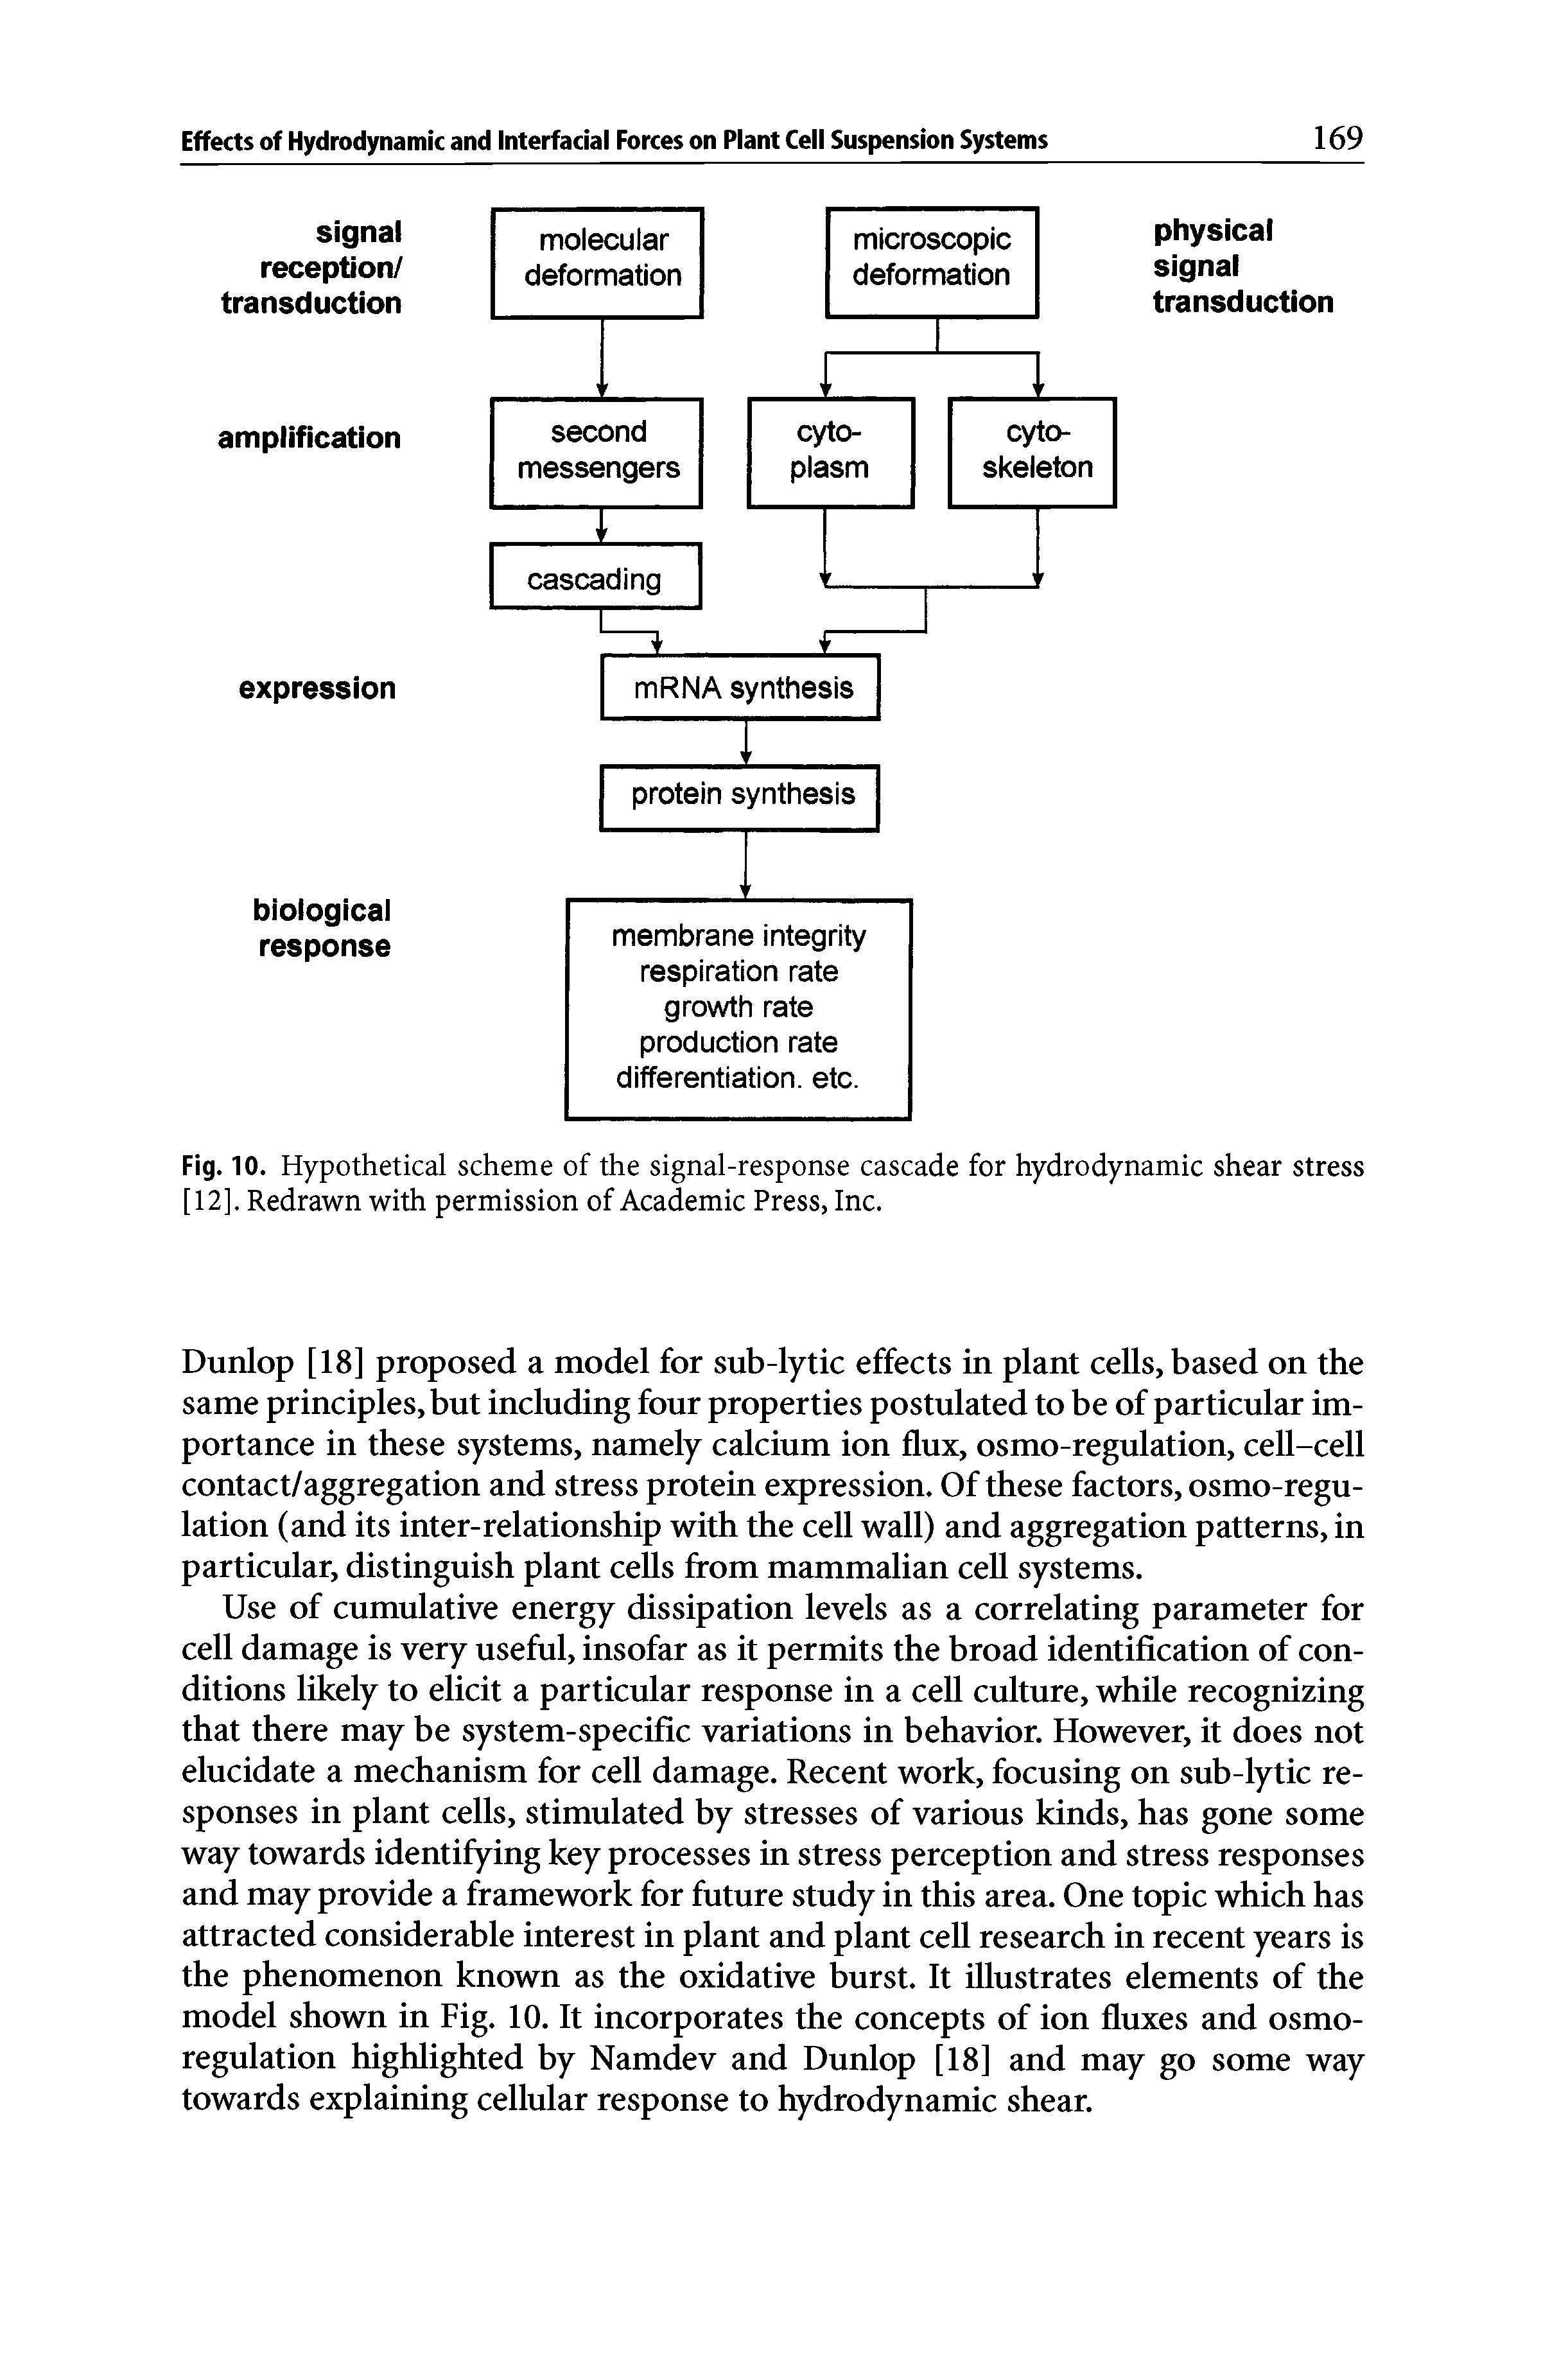 Fig. 10. Hypothetical scheme of the signal-response cascade for hydrodynamic shear stress [12]. Redrawn with permission of Academic Press, Inc.